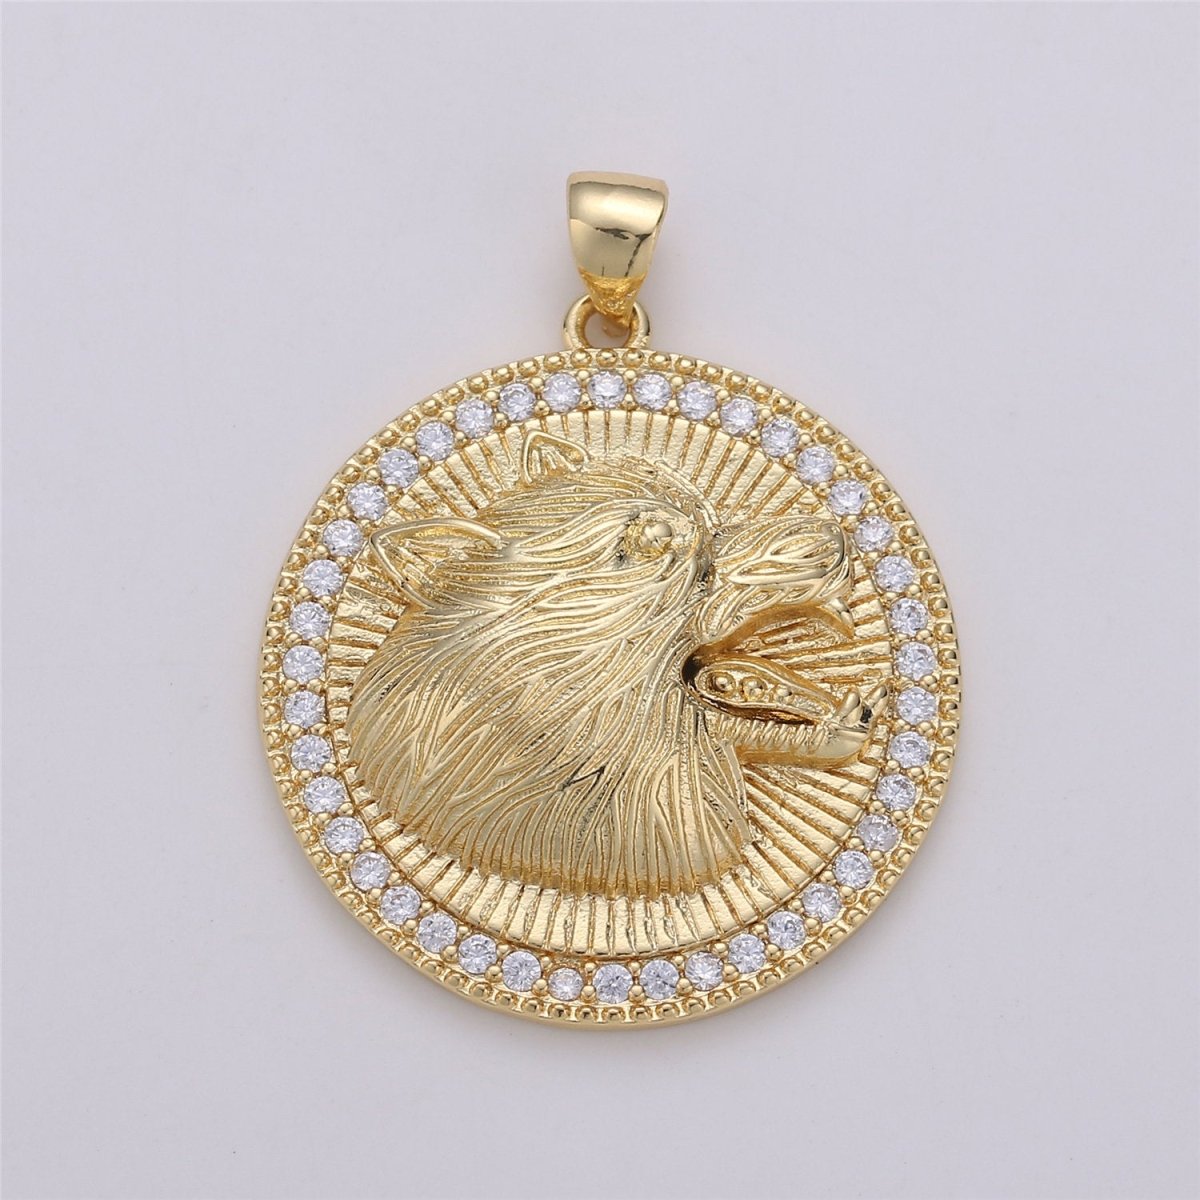 Howling Wolf Charm - 24k gold Filled Medallion Pendant The Wolf of Wall Street Pendant, Micro Pave Wolf Moon Charm for Statement Necklace I-579 - DLUXCA